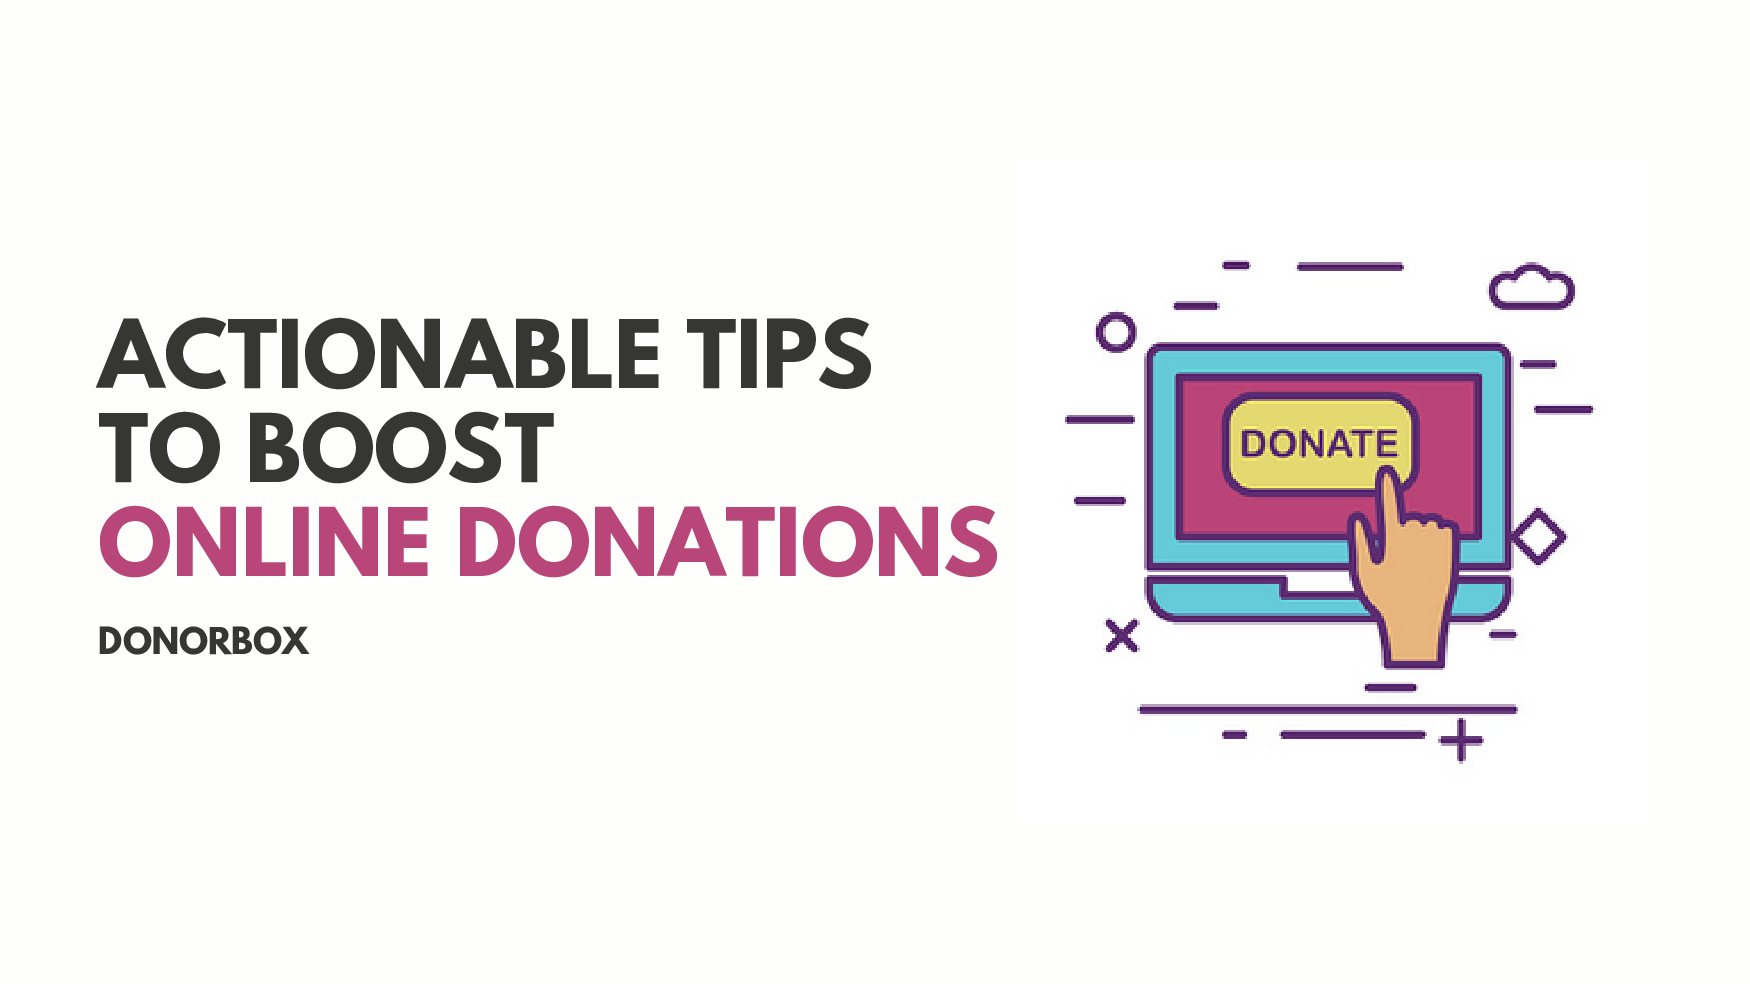 Actionable Tips to Boost Online Donations